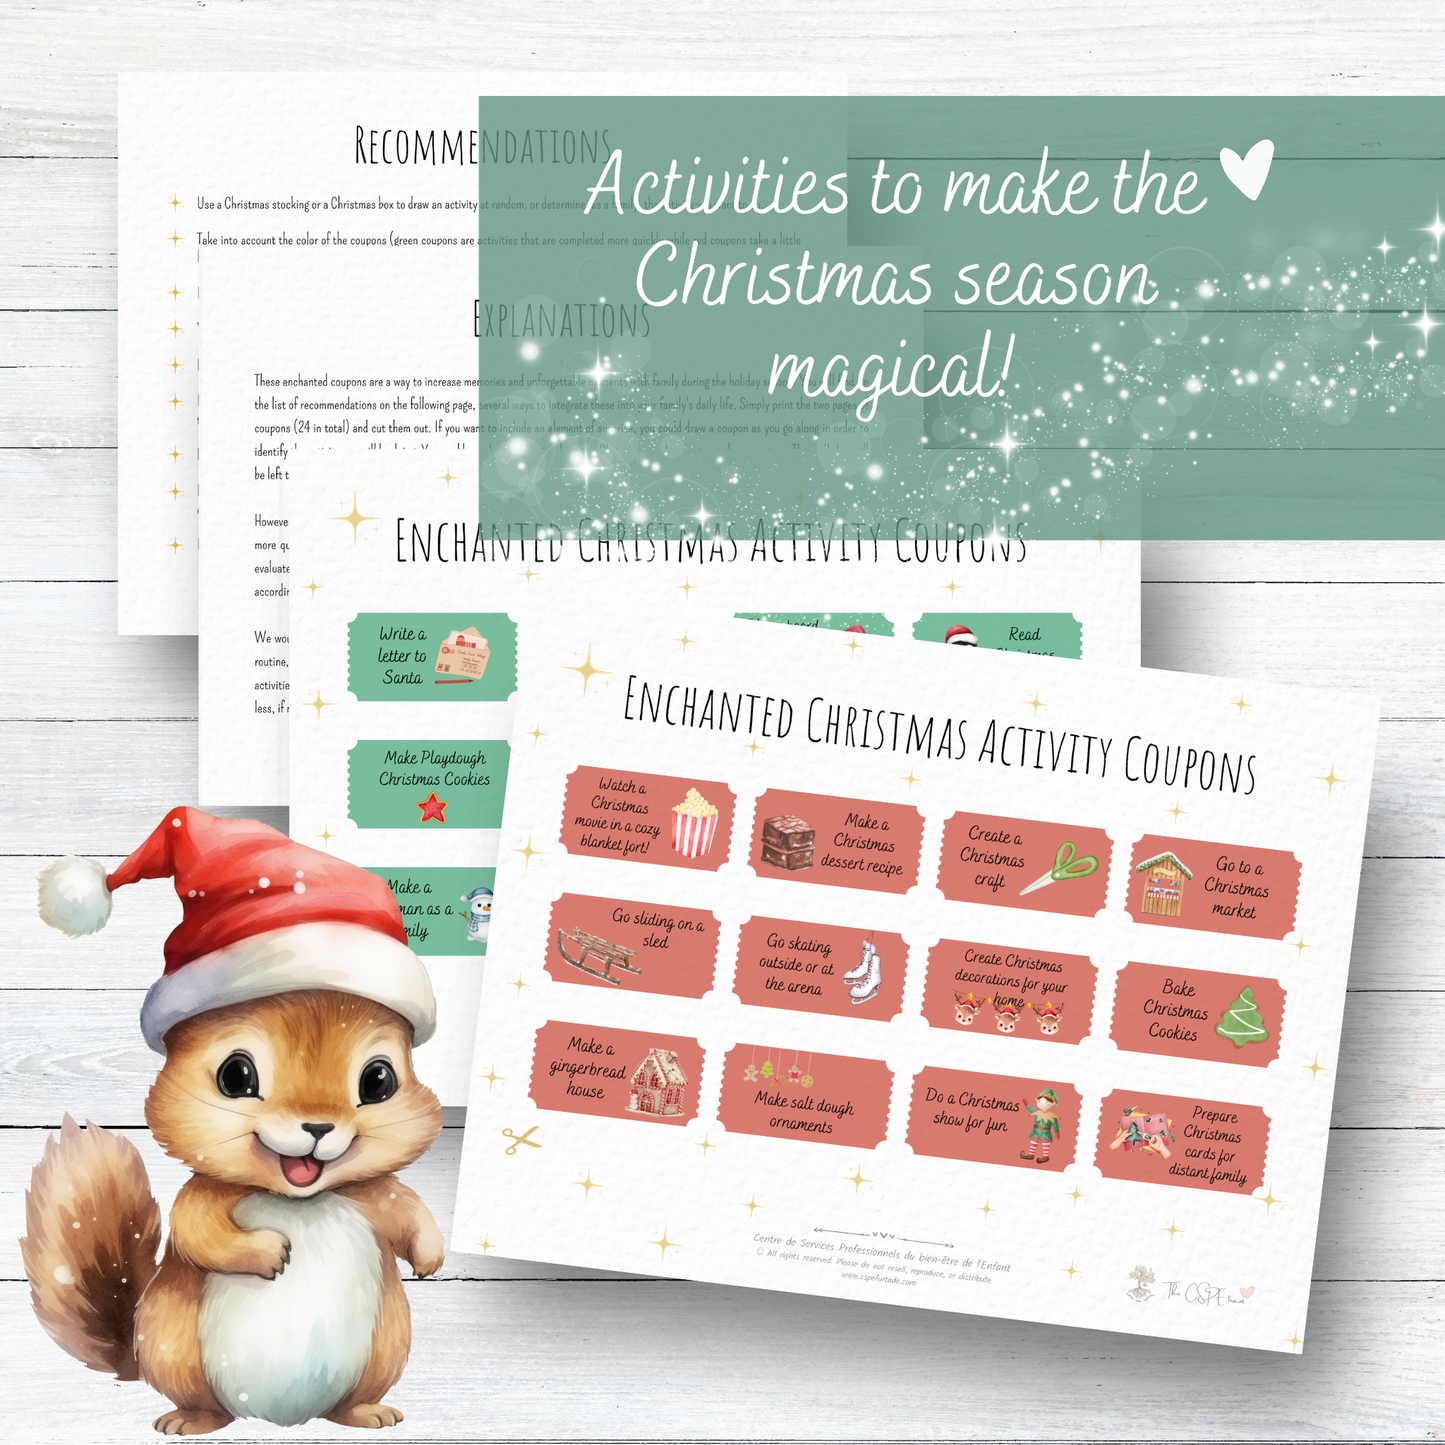 Enchanted Christmas Activity Coupons